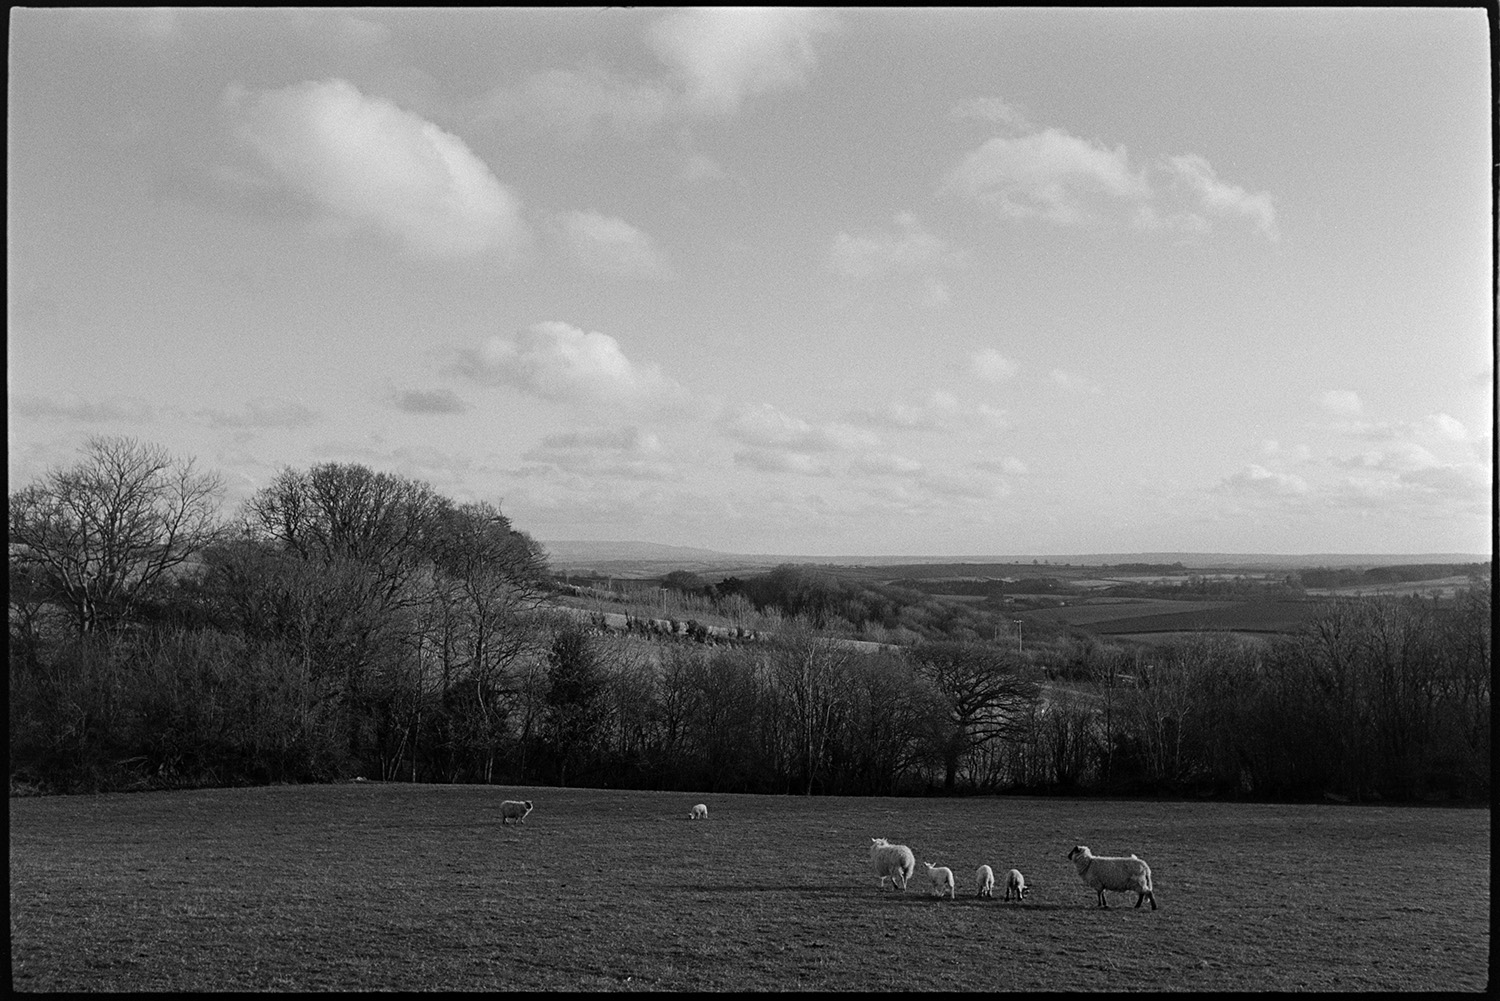 Landscapes with chickens and sheep, strange clouds, farmer.
[Sheep and lambs grazing in a field at Ashwell Farm, Dolton. Surrounding fields, trees and hedges can be seen in the background, as well as clouds in the sky.]